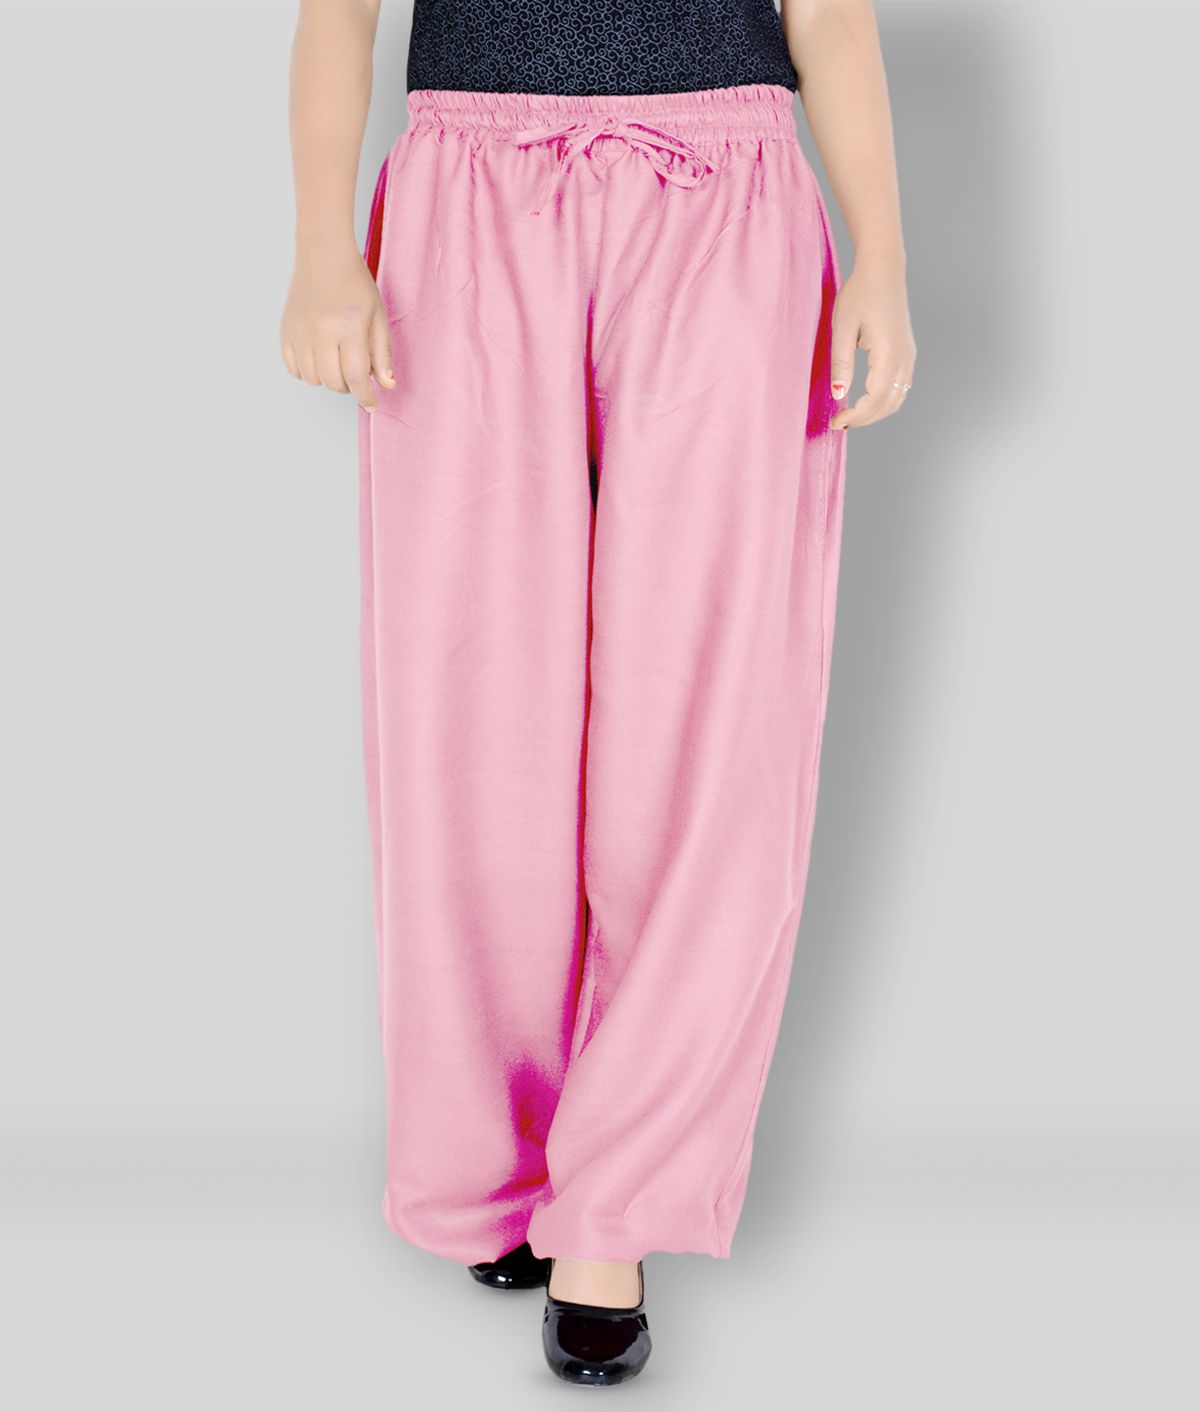 Sttoffa - Pink Rayon Flared Women's Palazzos ( Pack of 1 )